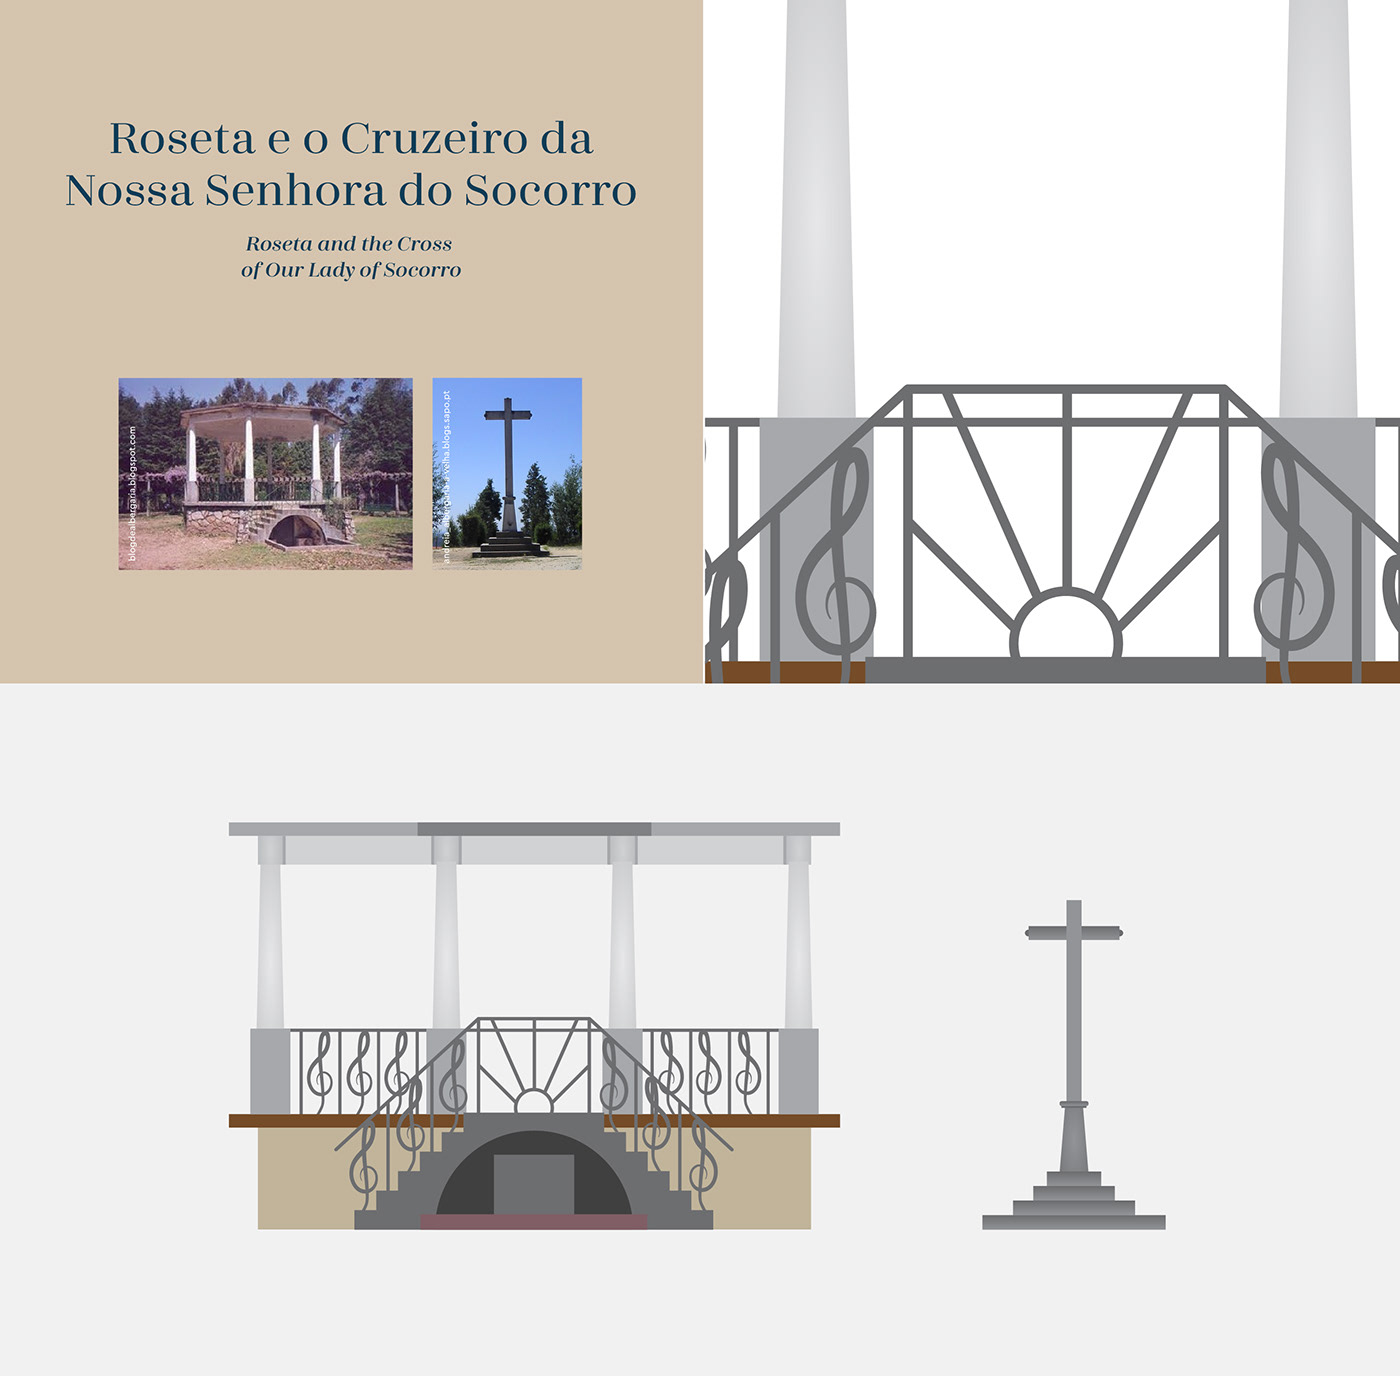 city places monuments architecture ILLUSTRATION  vector Albergaria Portugal graphic buildings